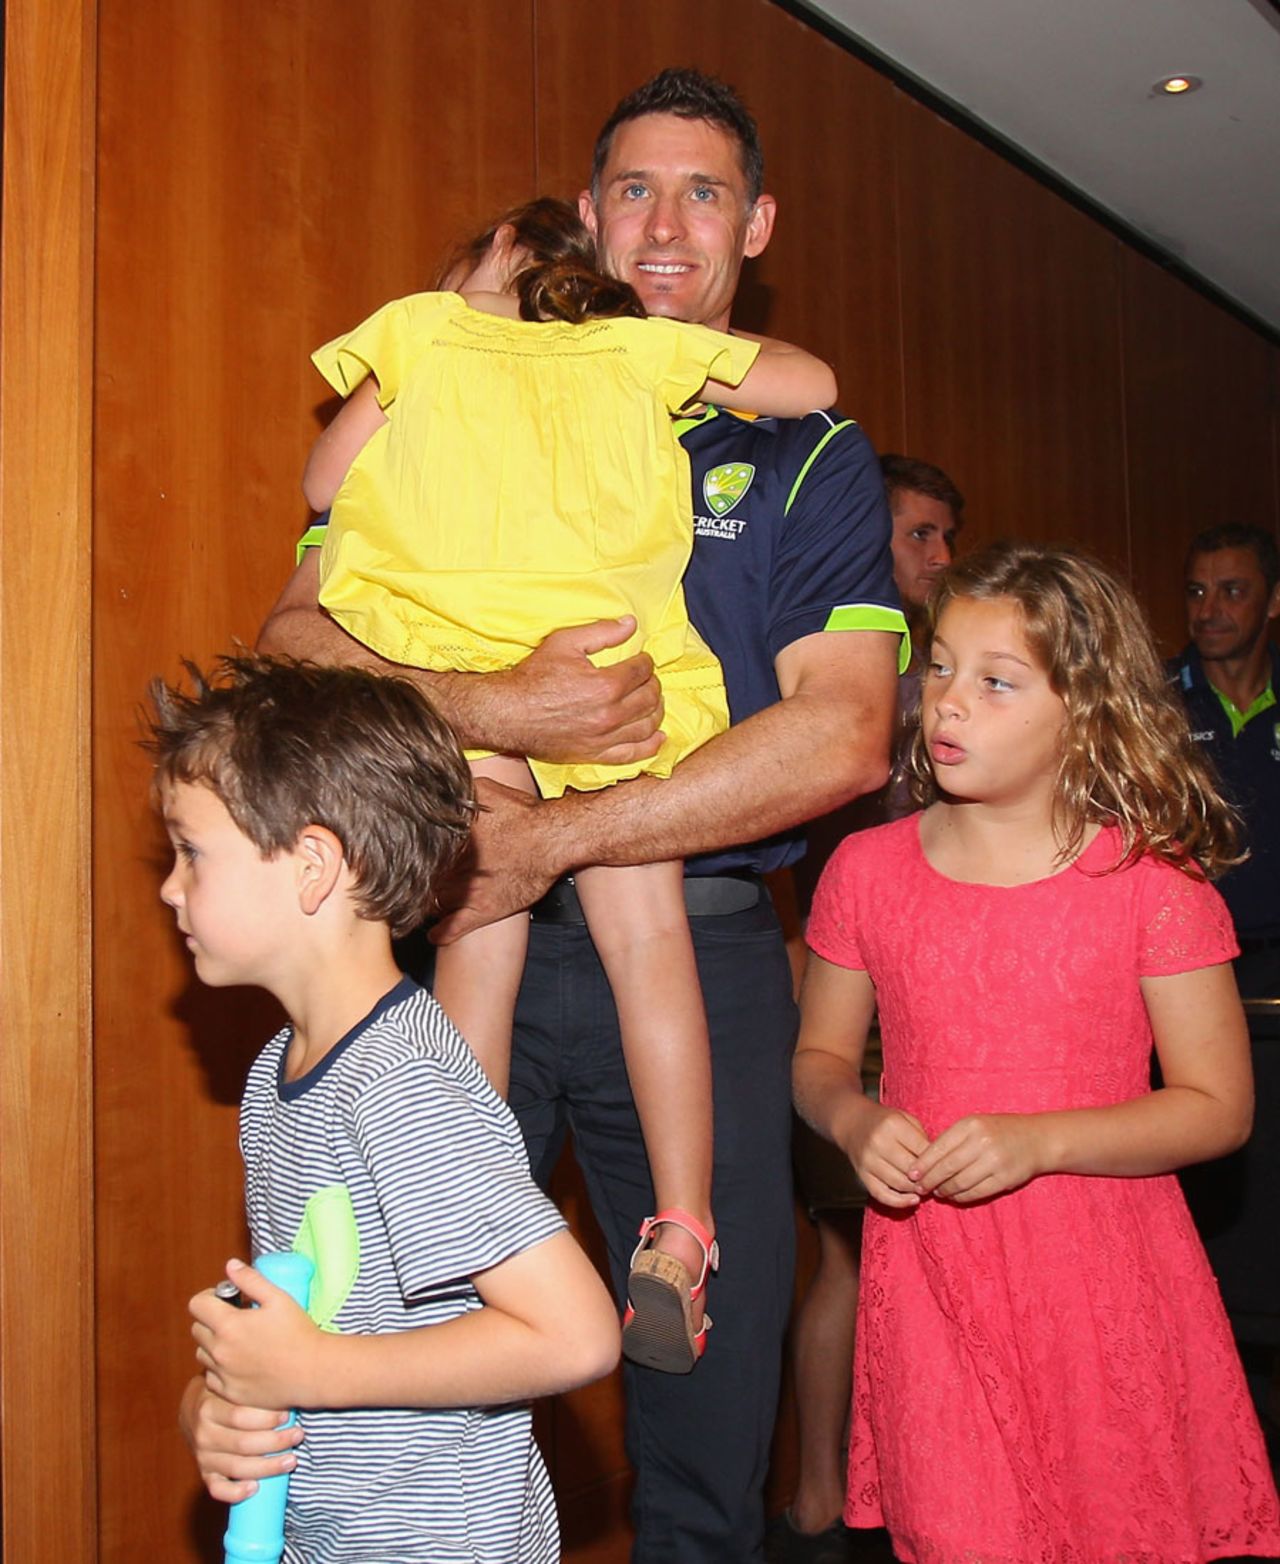 Michael Hussey with his family after announcing his retirement, Melbourne, December 30, 2012